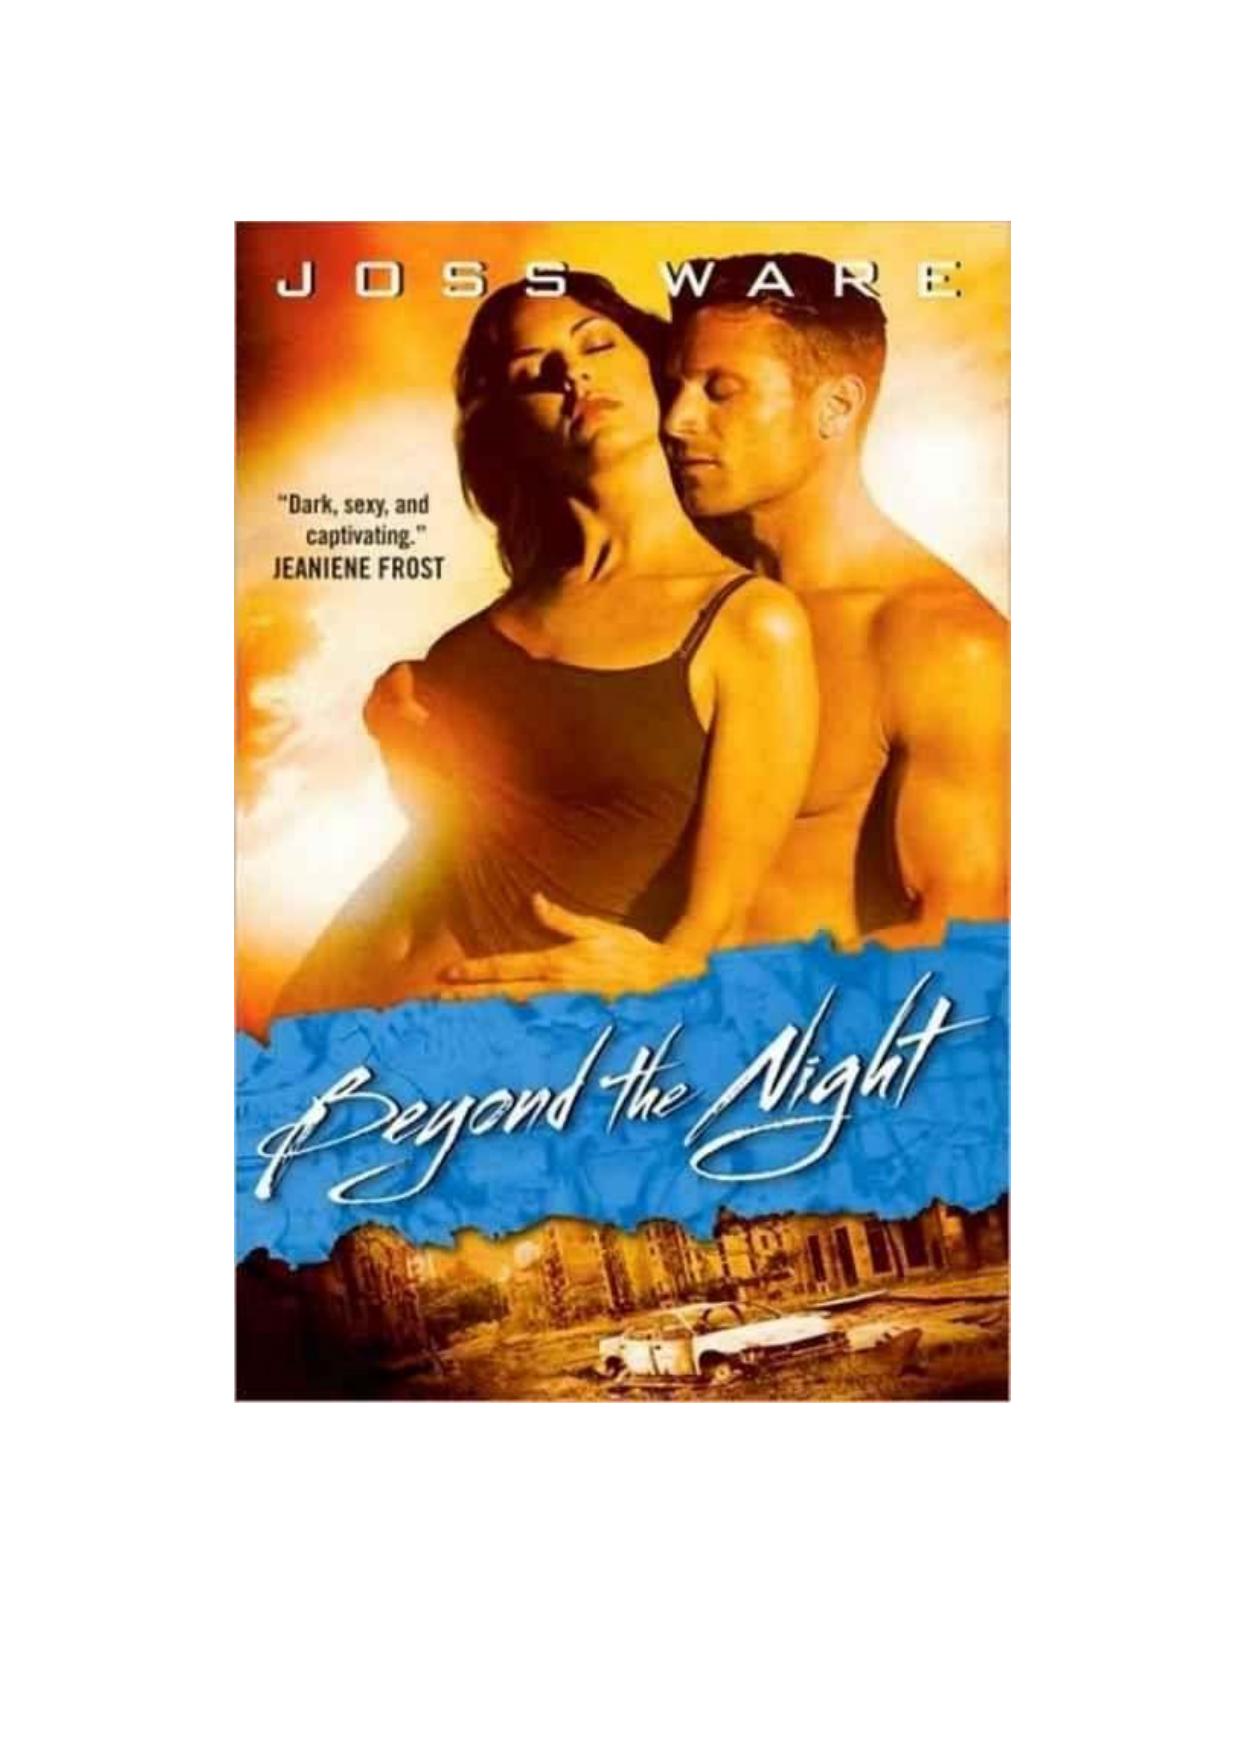 Beyond the Night by Joss Ware